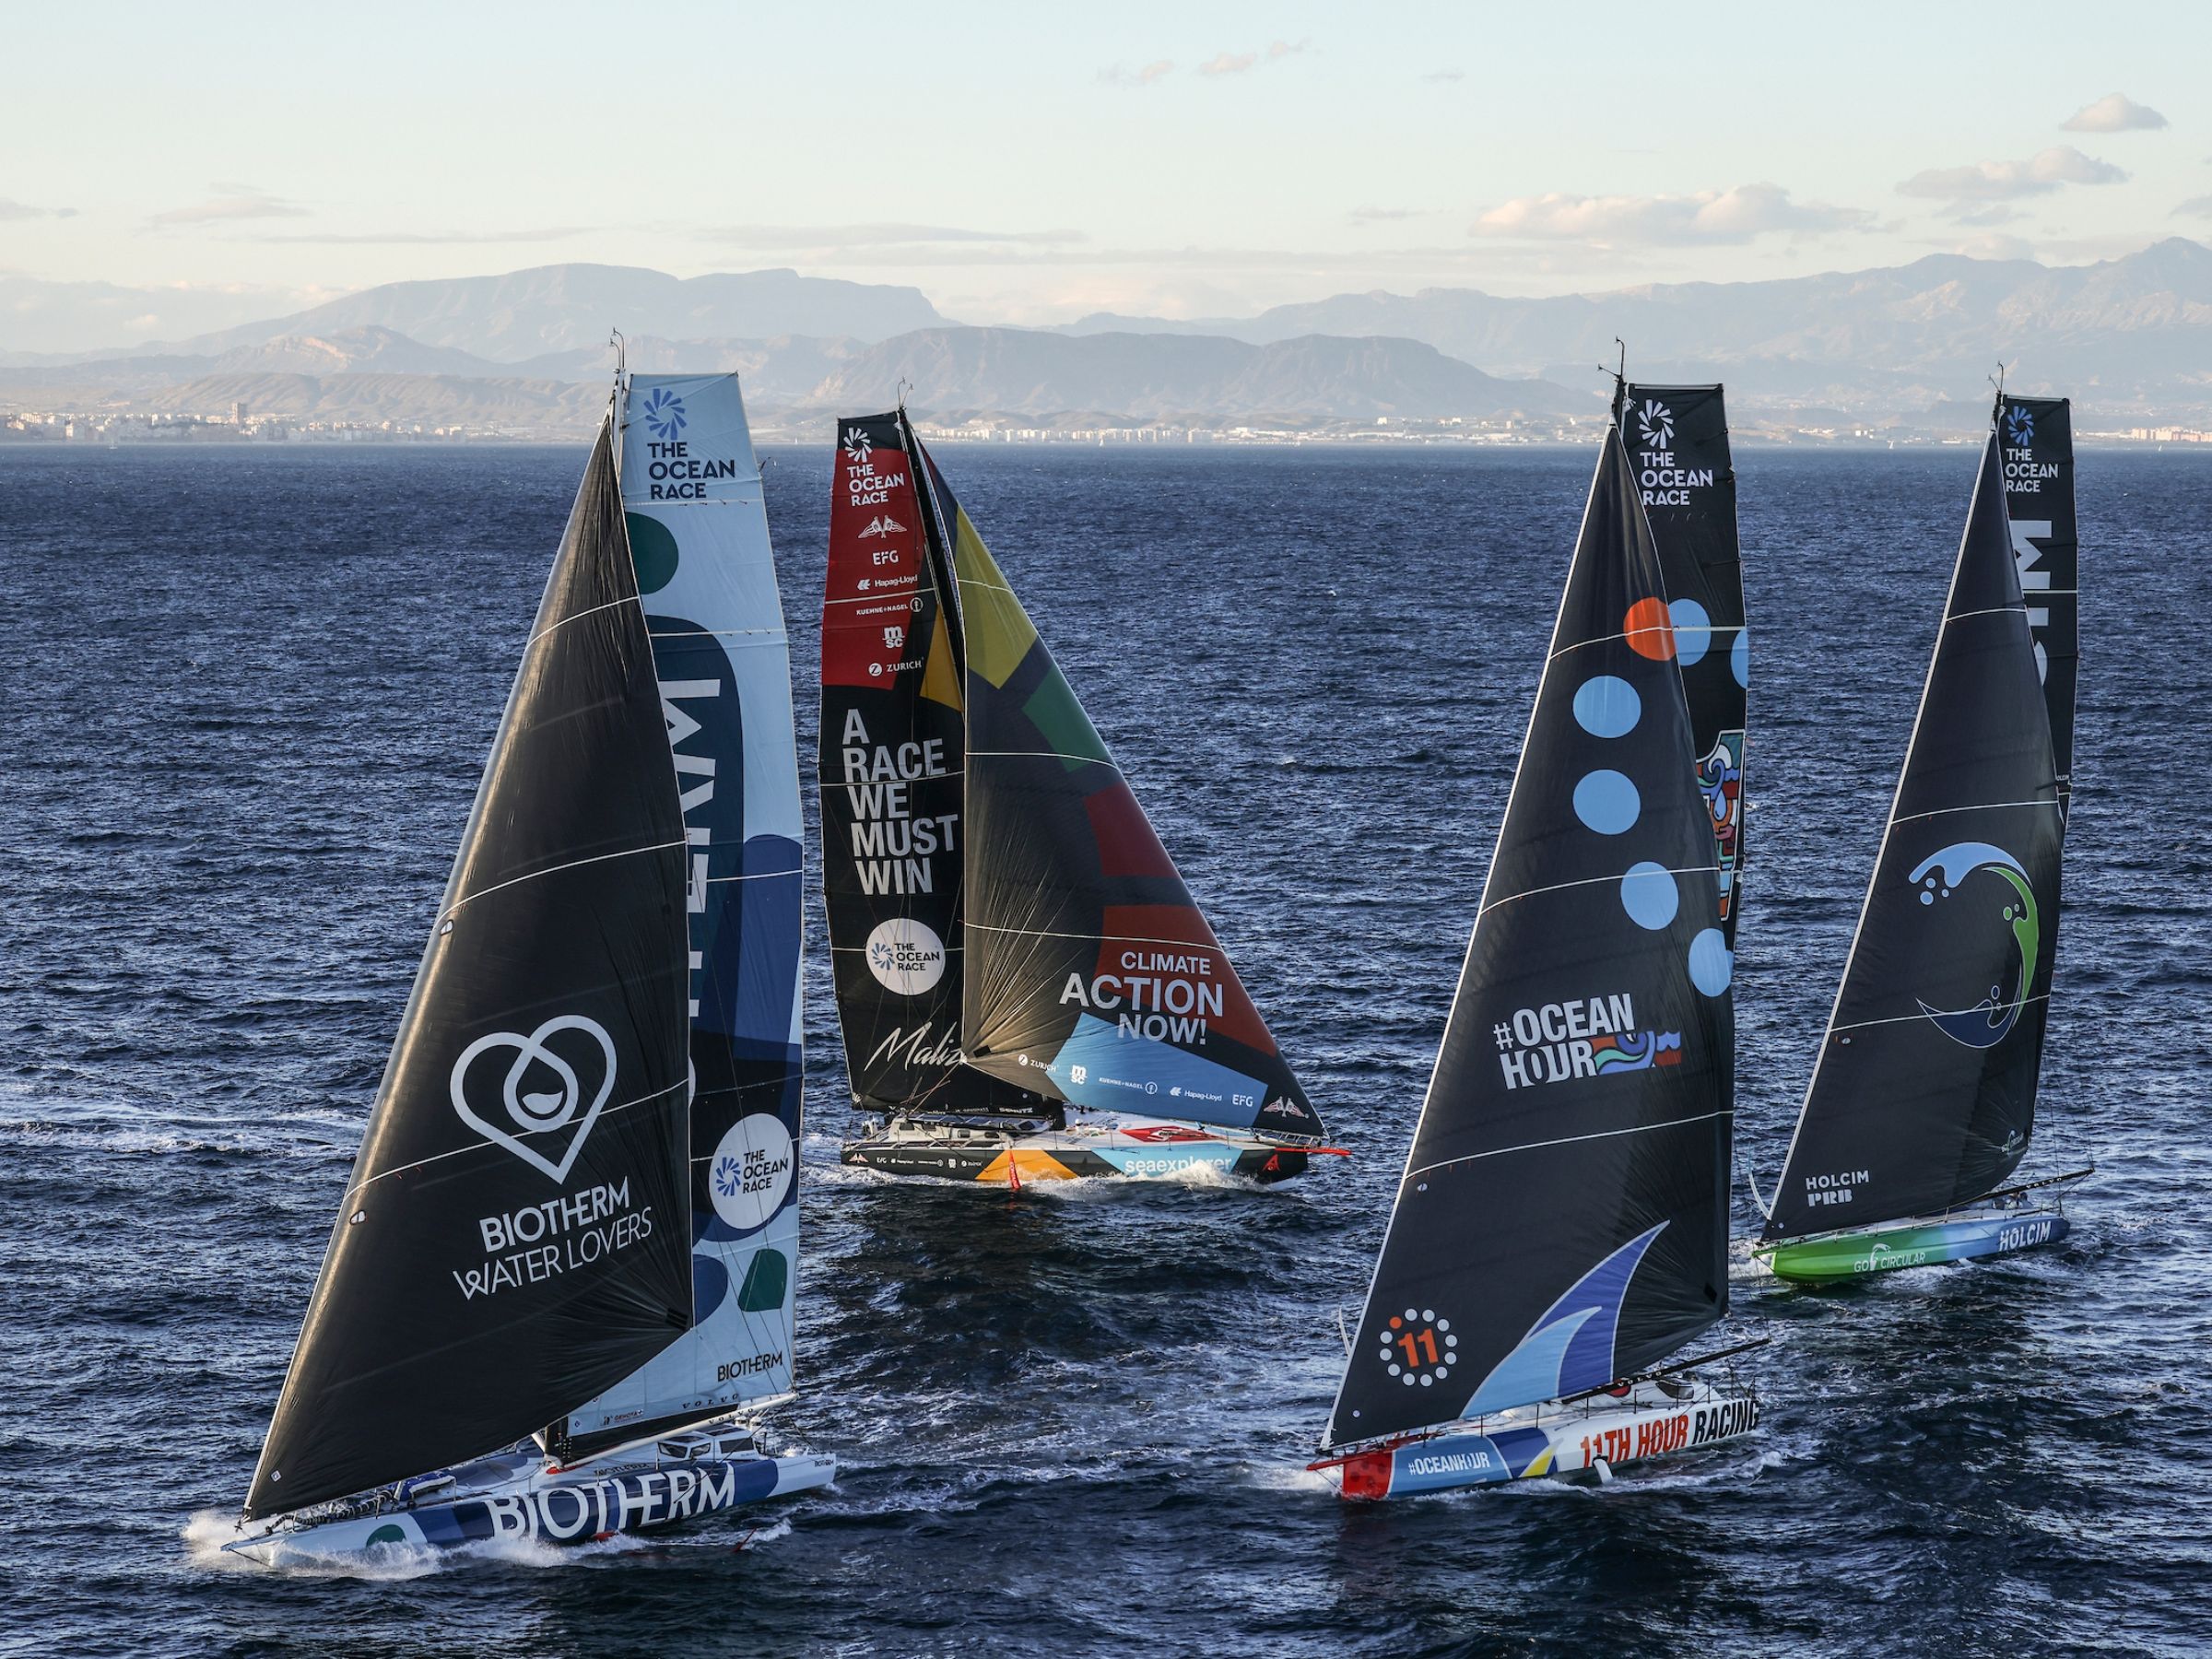 imoca class racing to prevent collisions at sea